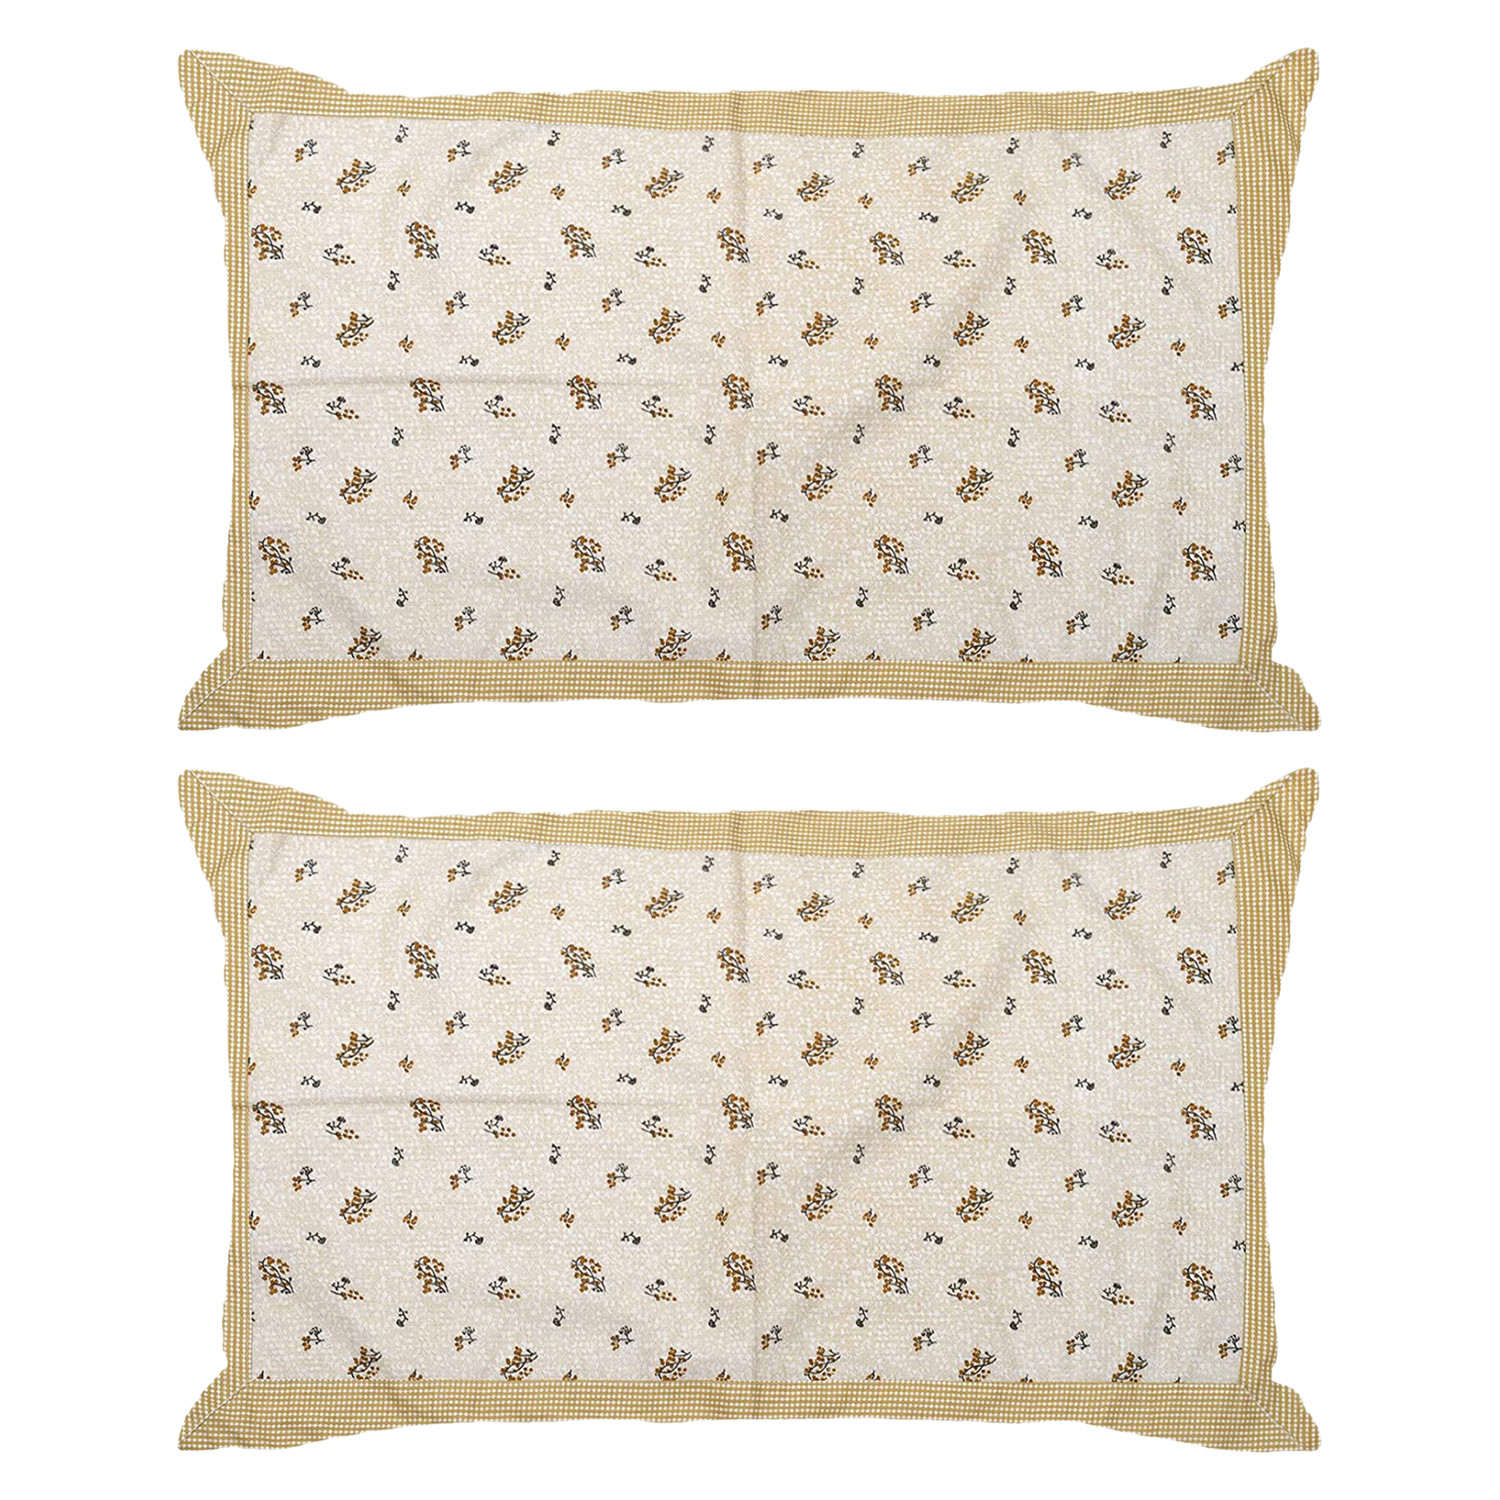 Kuber Industries Leaf Print Cotton Pillow Cover- 17x27 Inch,(Beige)